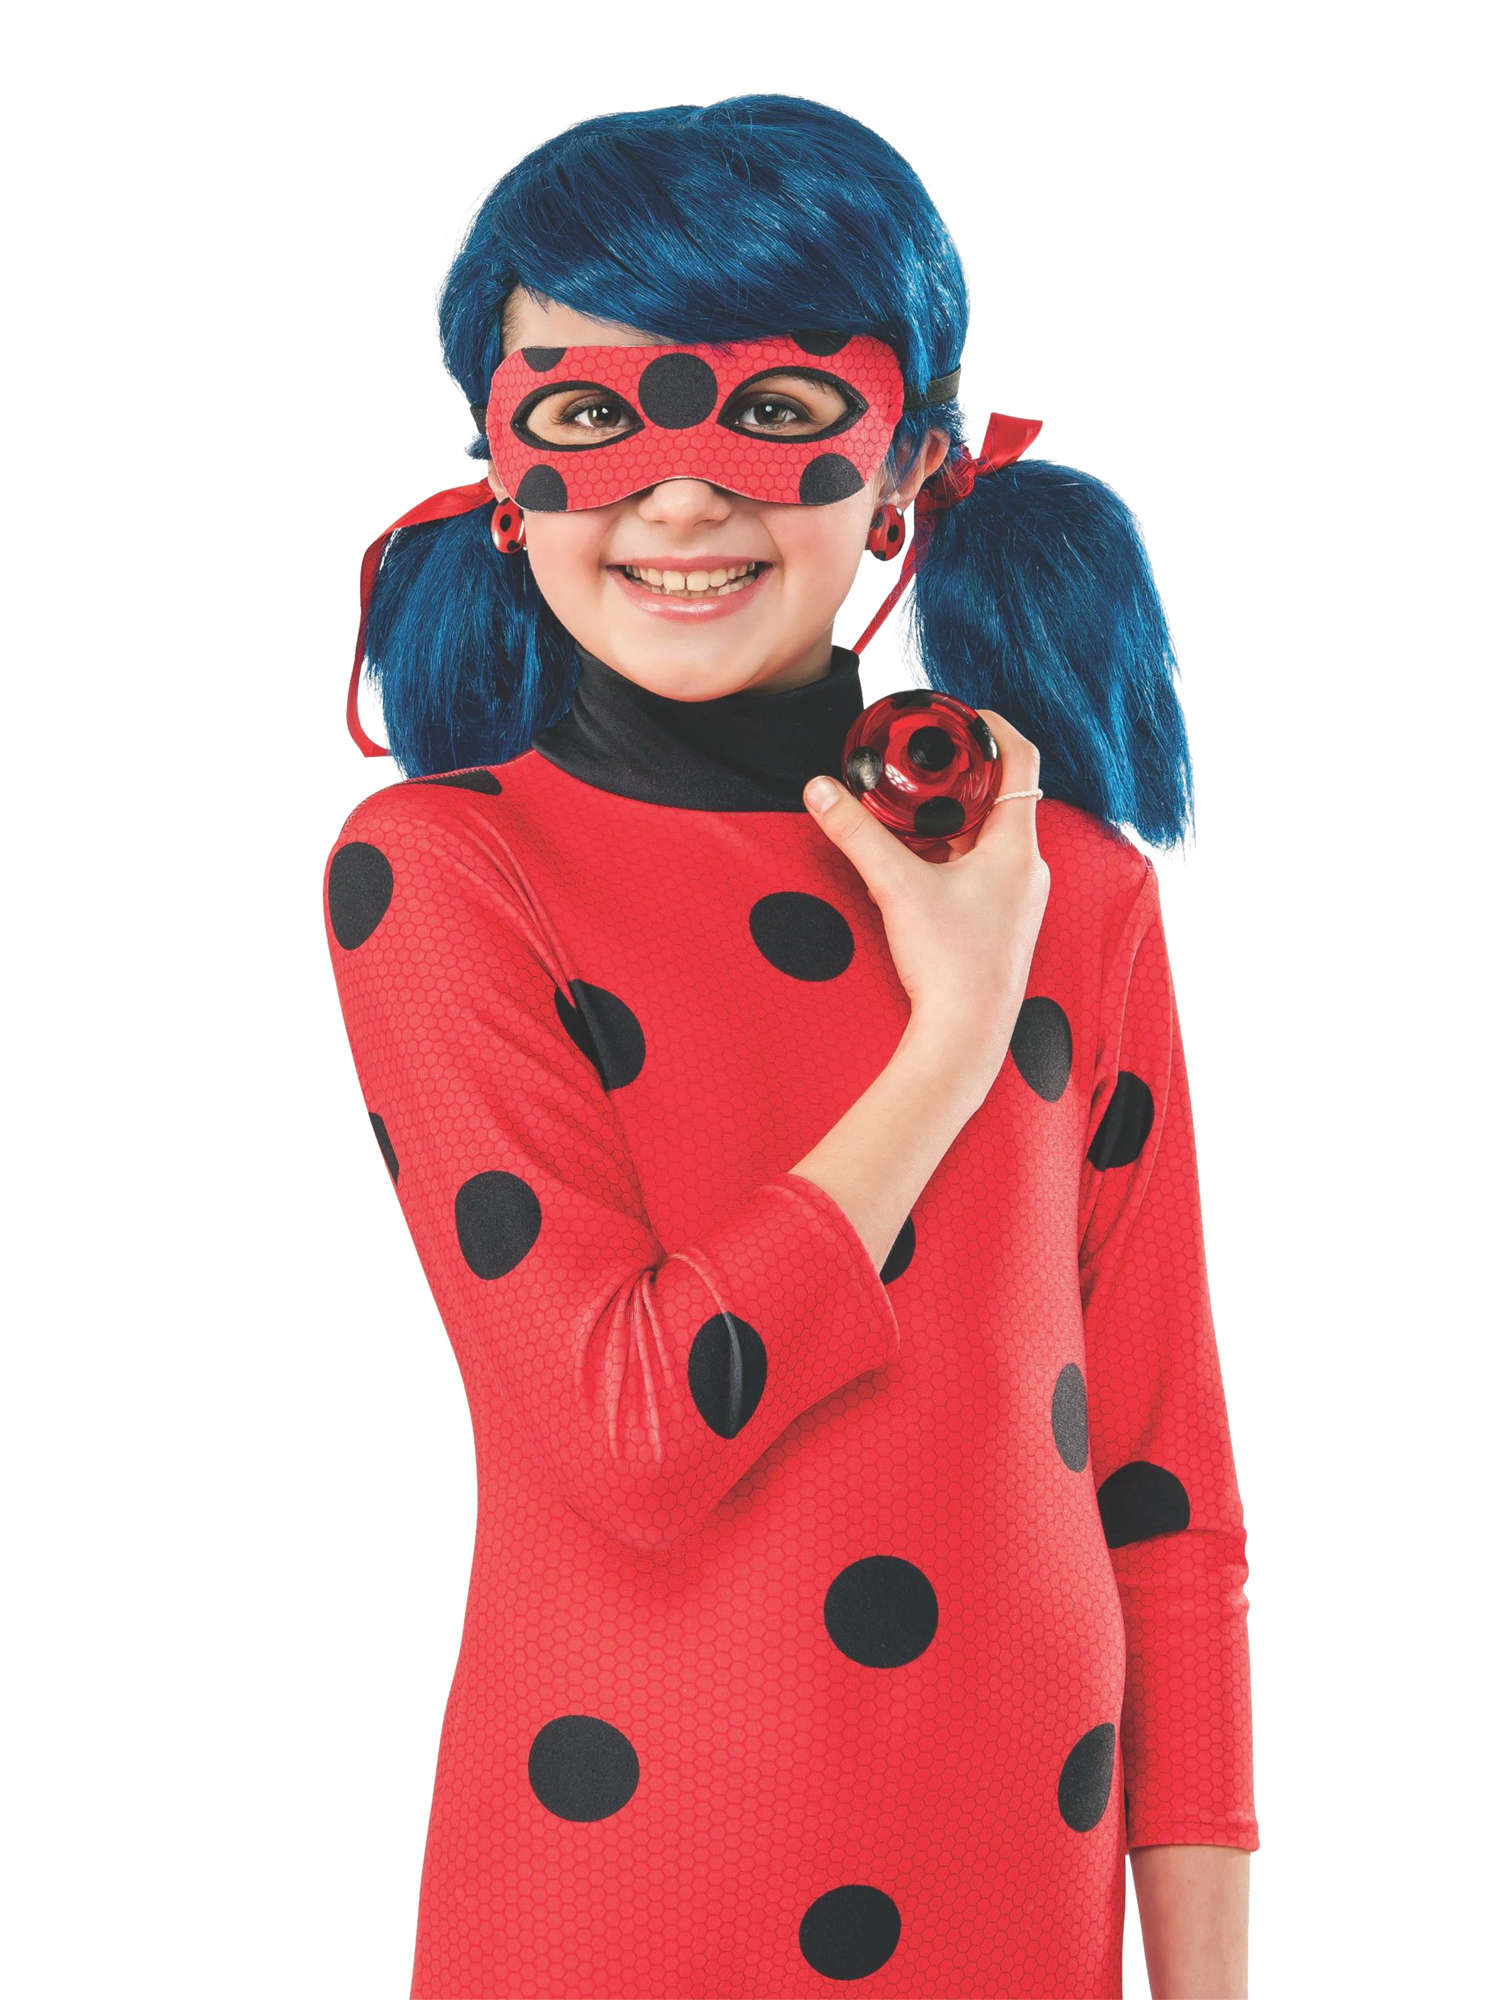 Ladybug, multi-colored, Miraculous, Accessories, Child, Front